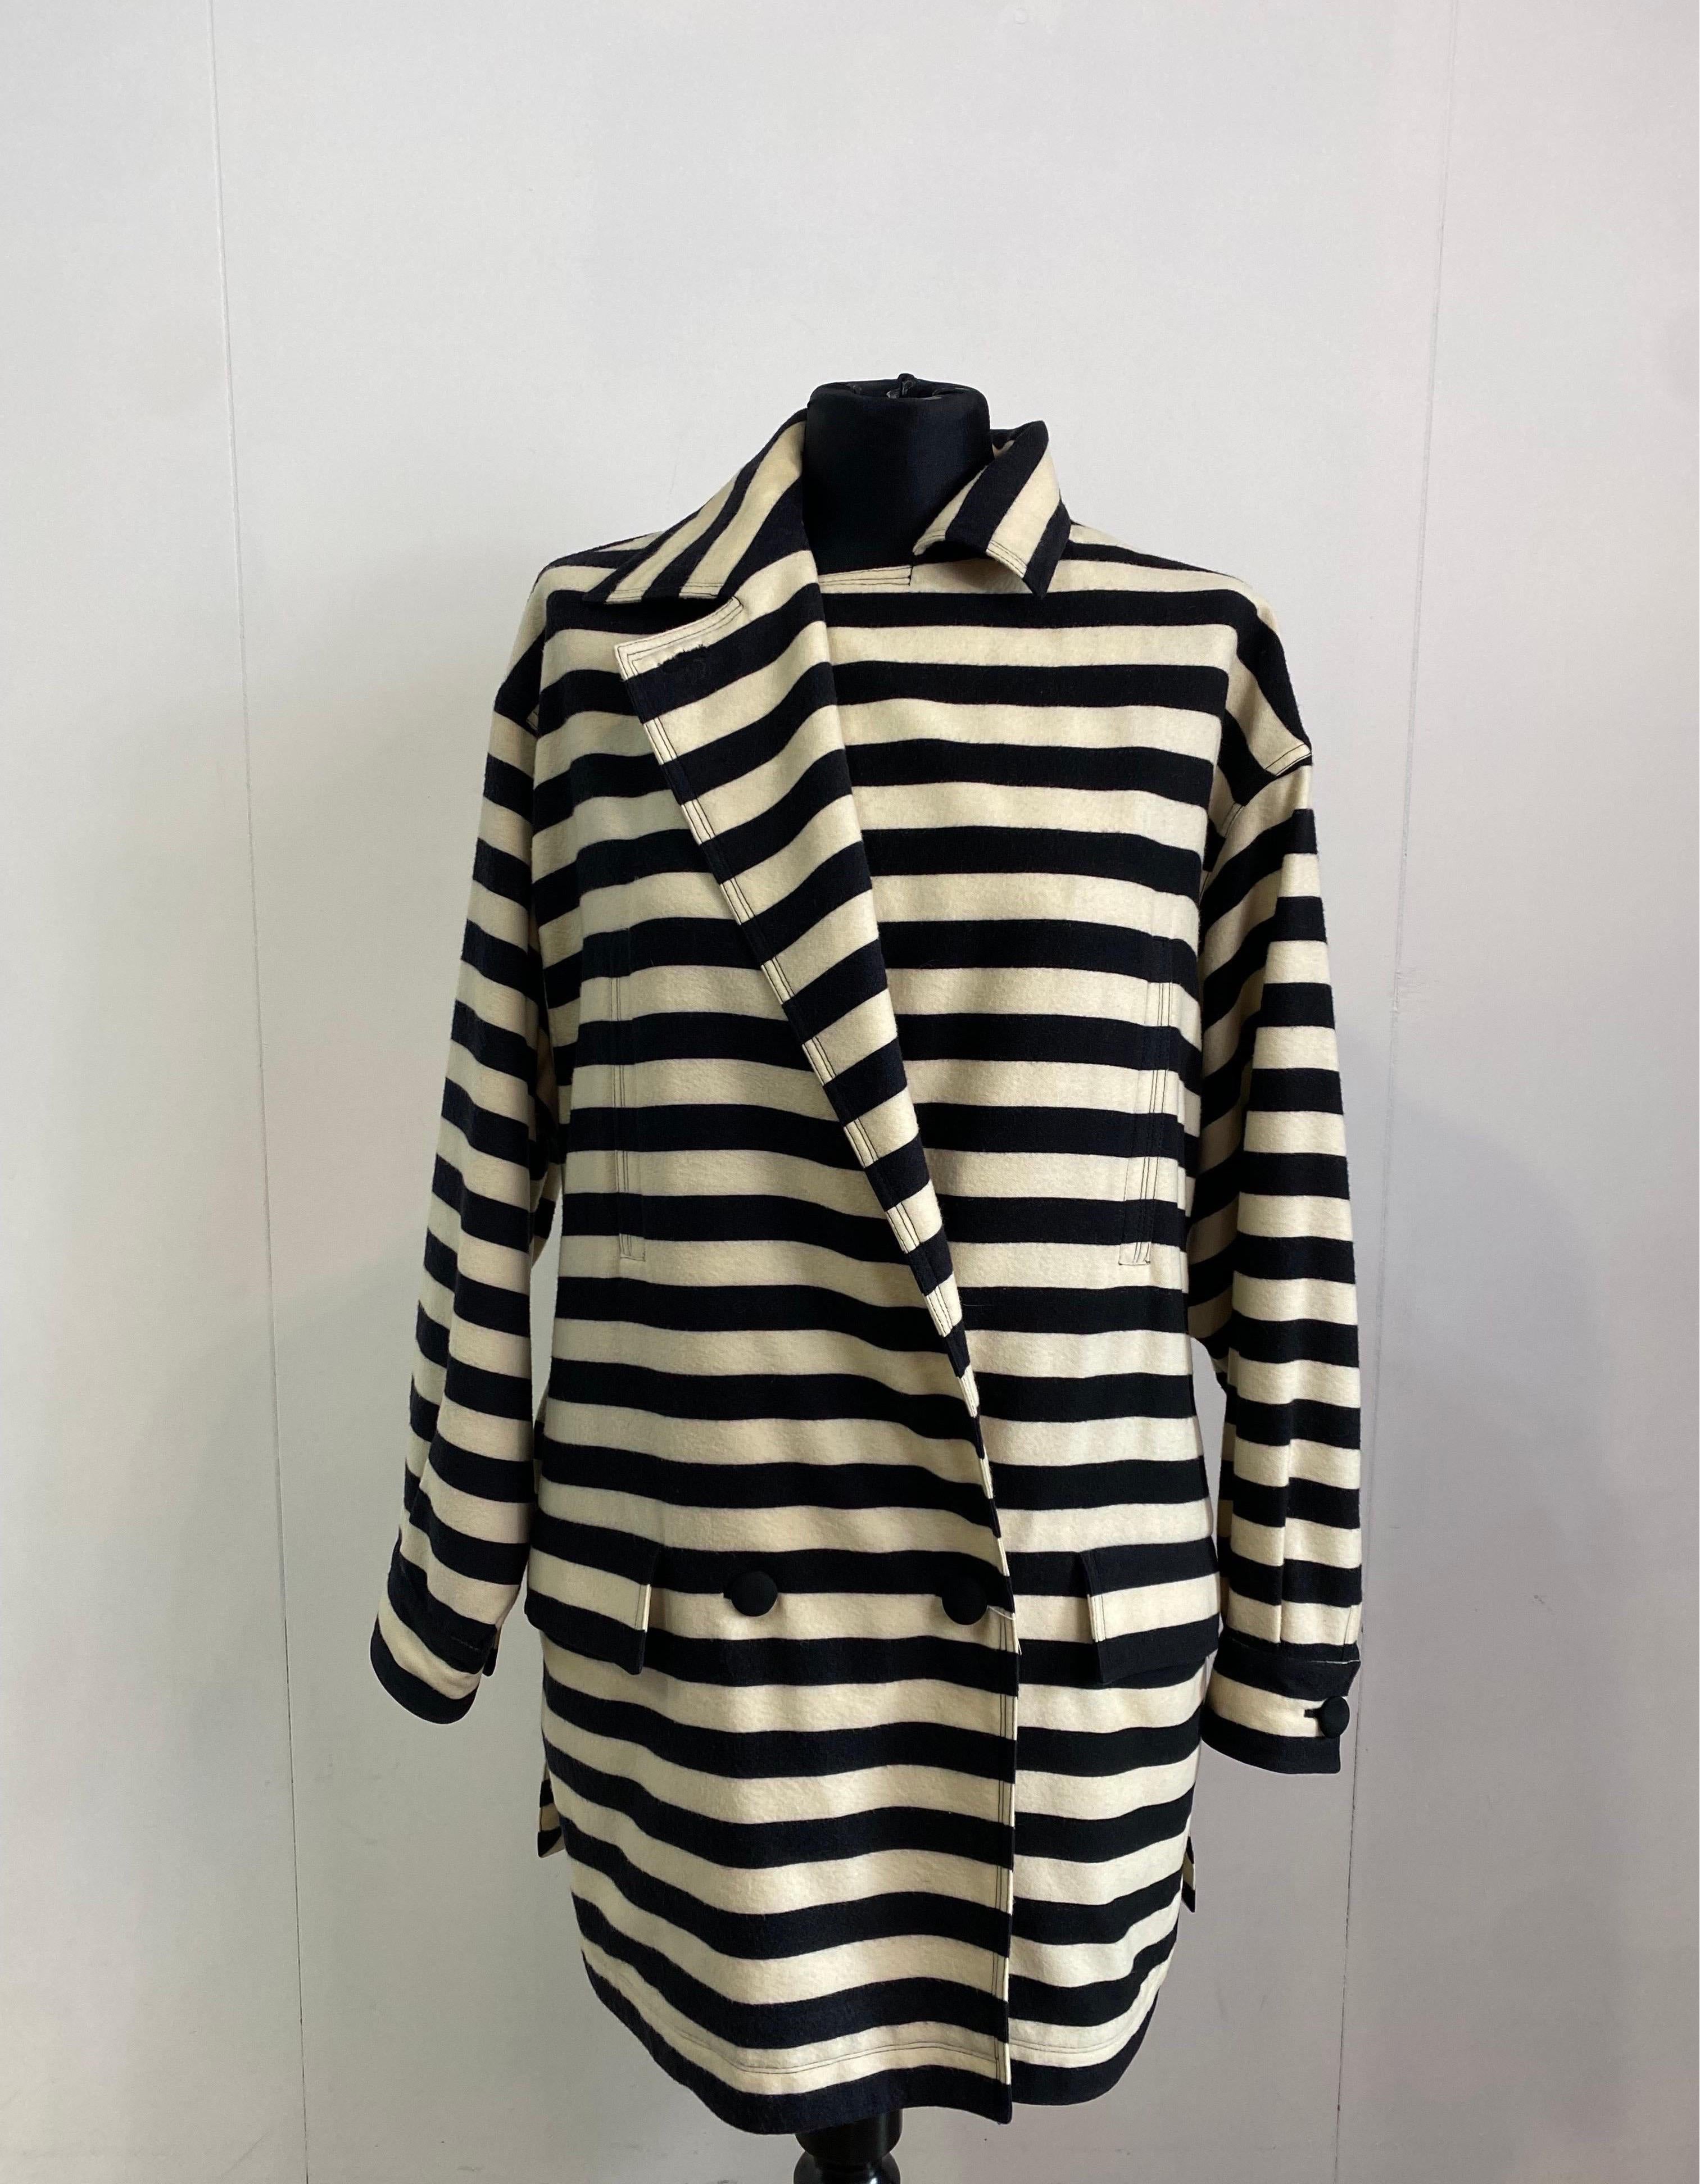 Gianni Versace 90s vintage striped Jacket For Sale 3